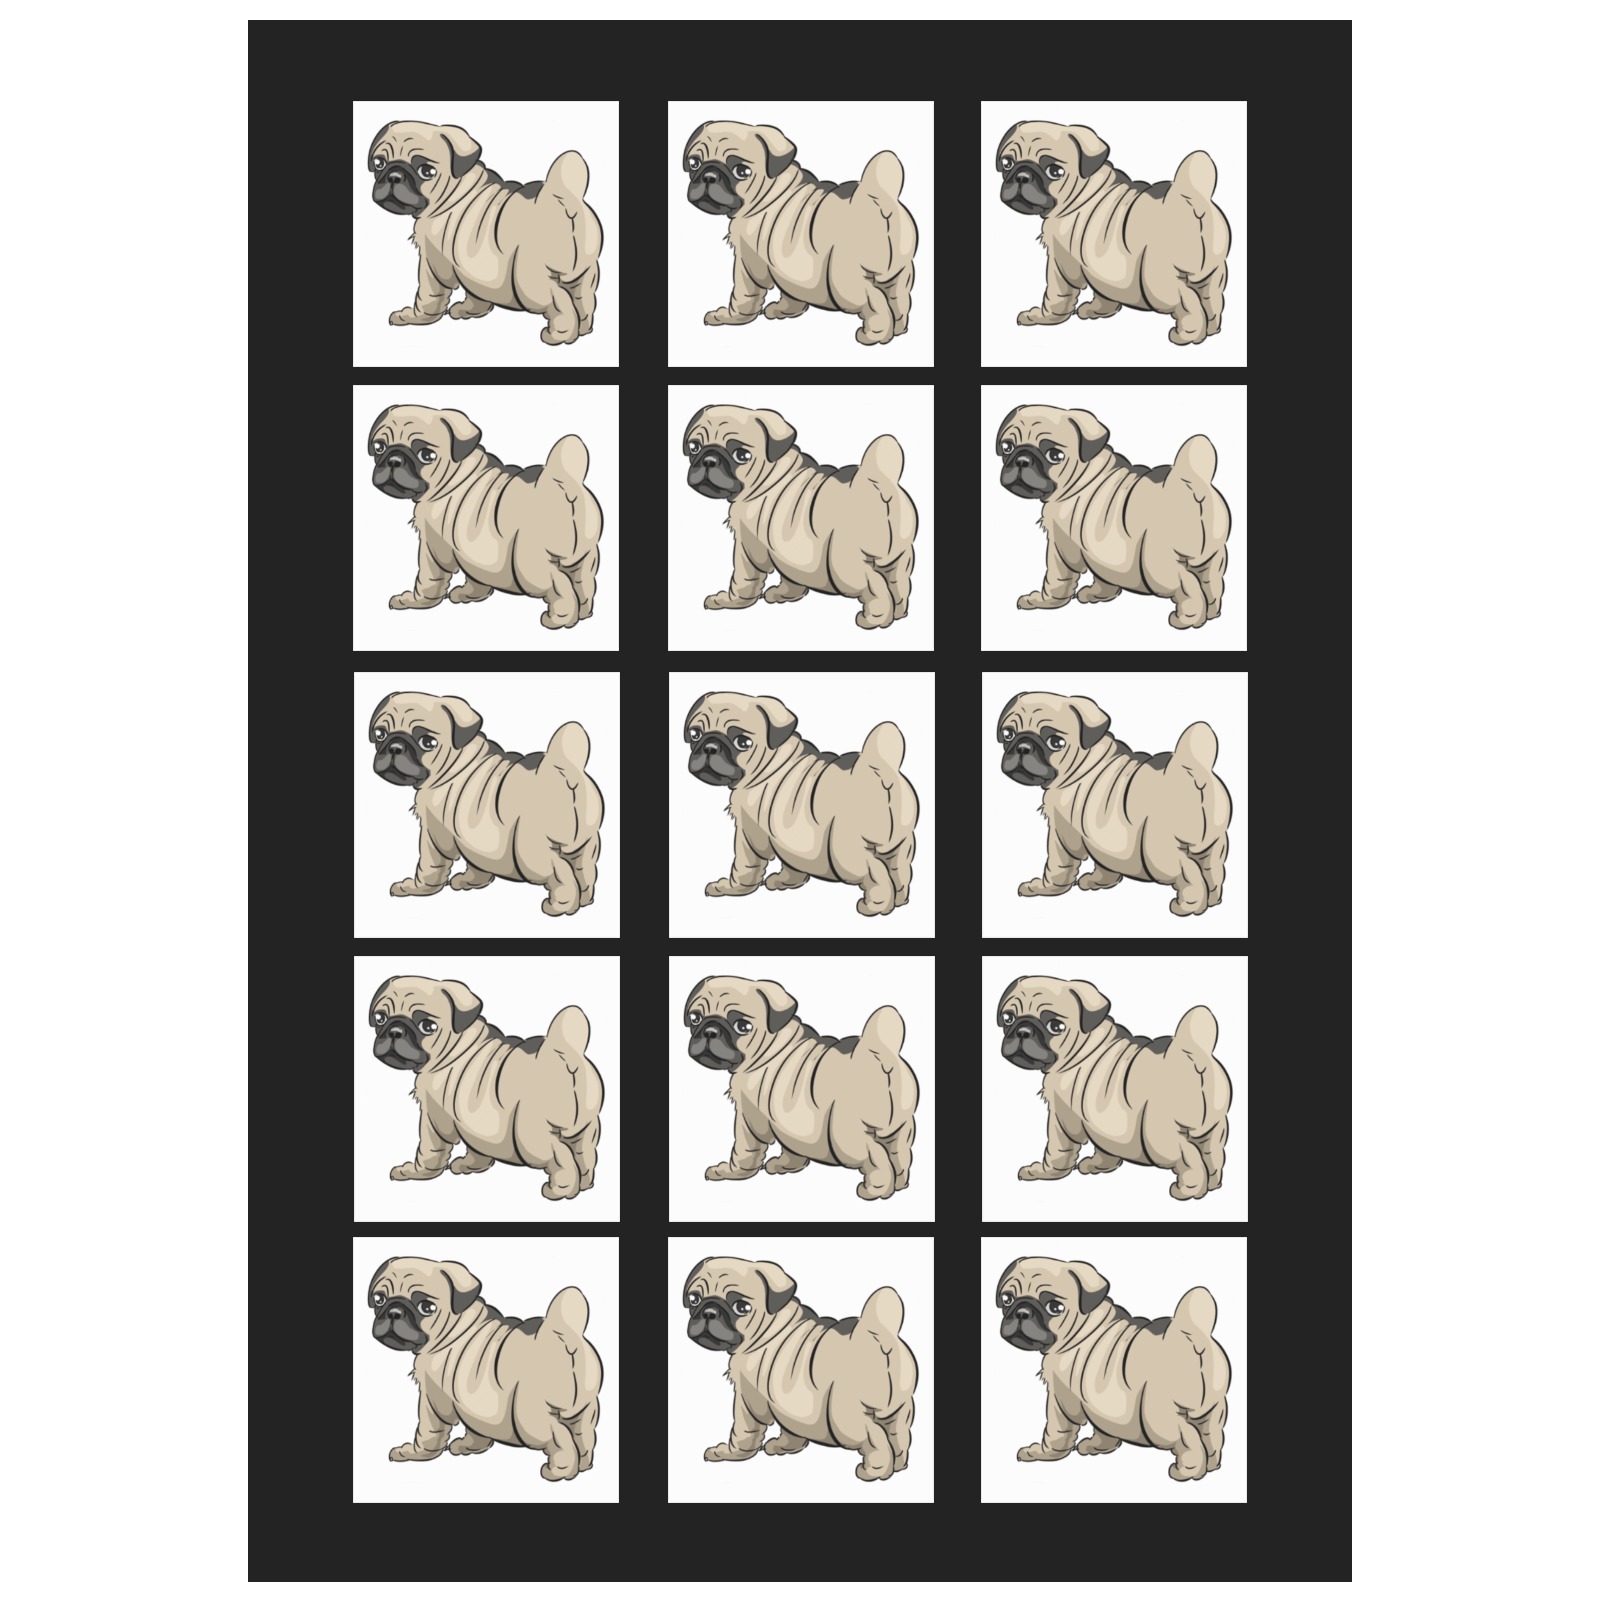 Adorable Pug - Image from Pngtree Personalized Temporary Tattoo (15 Pieces)